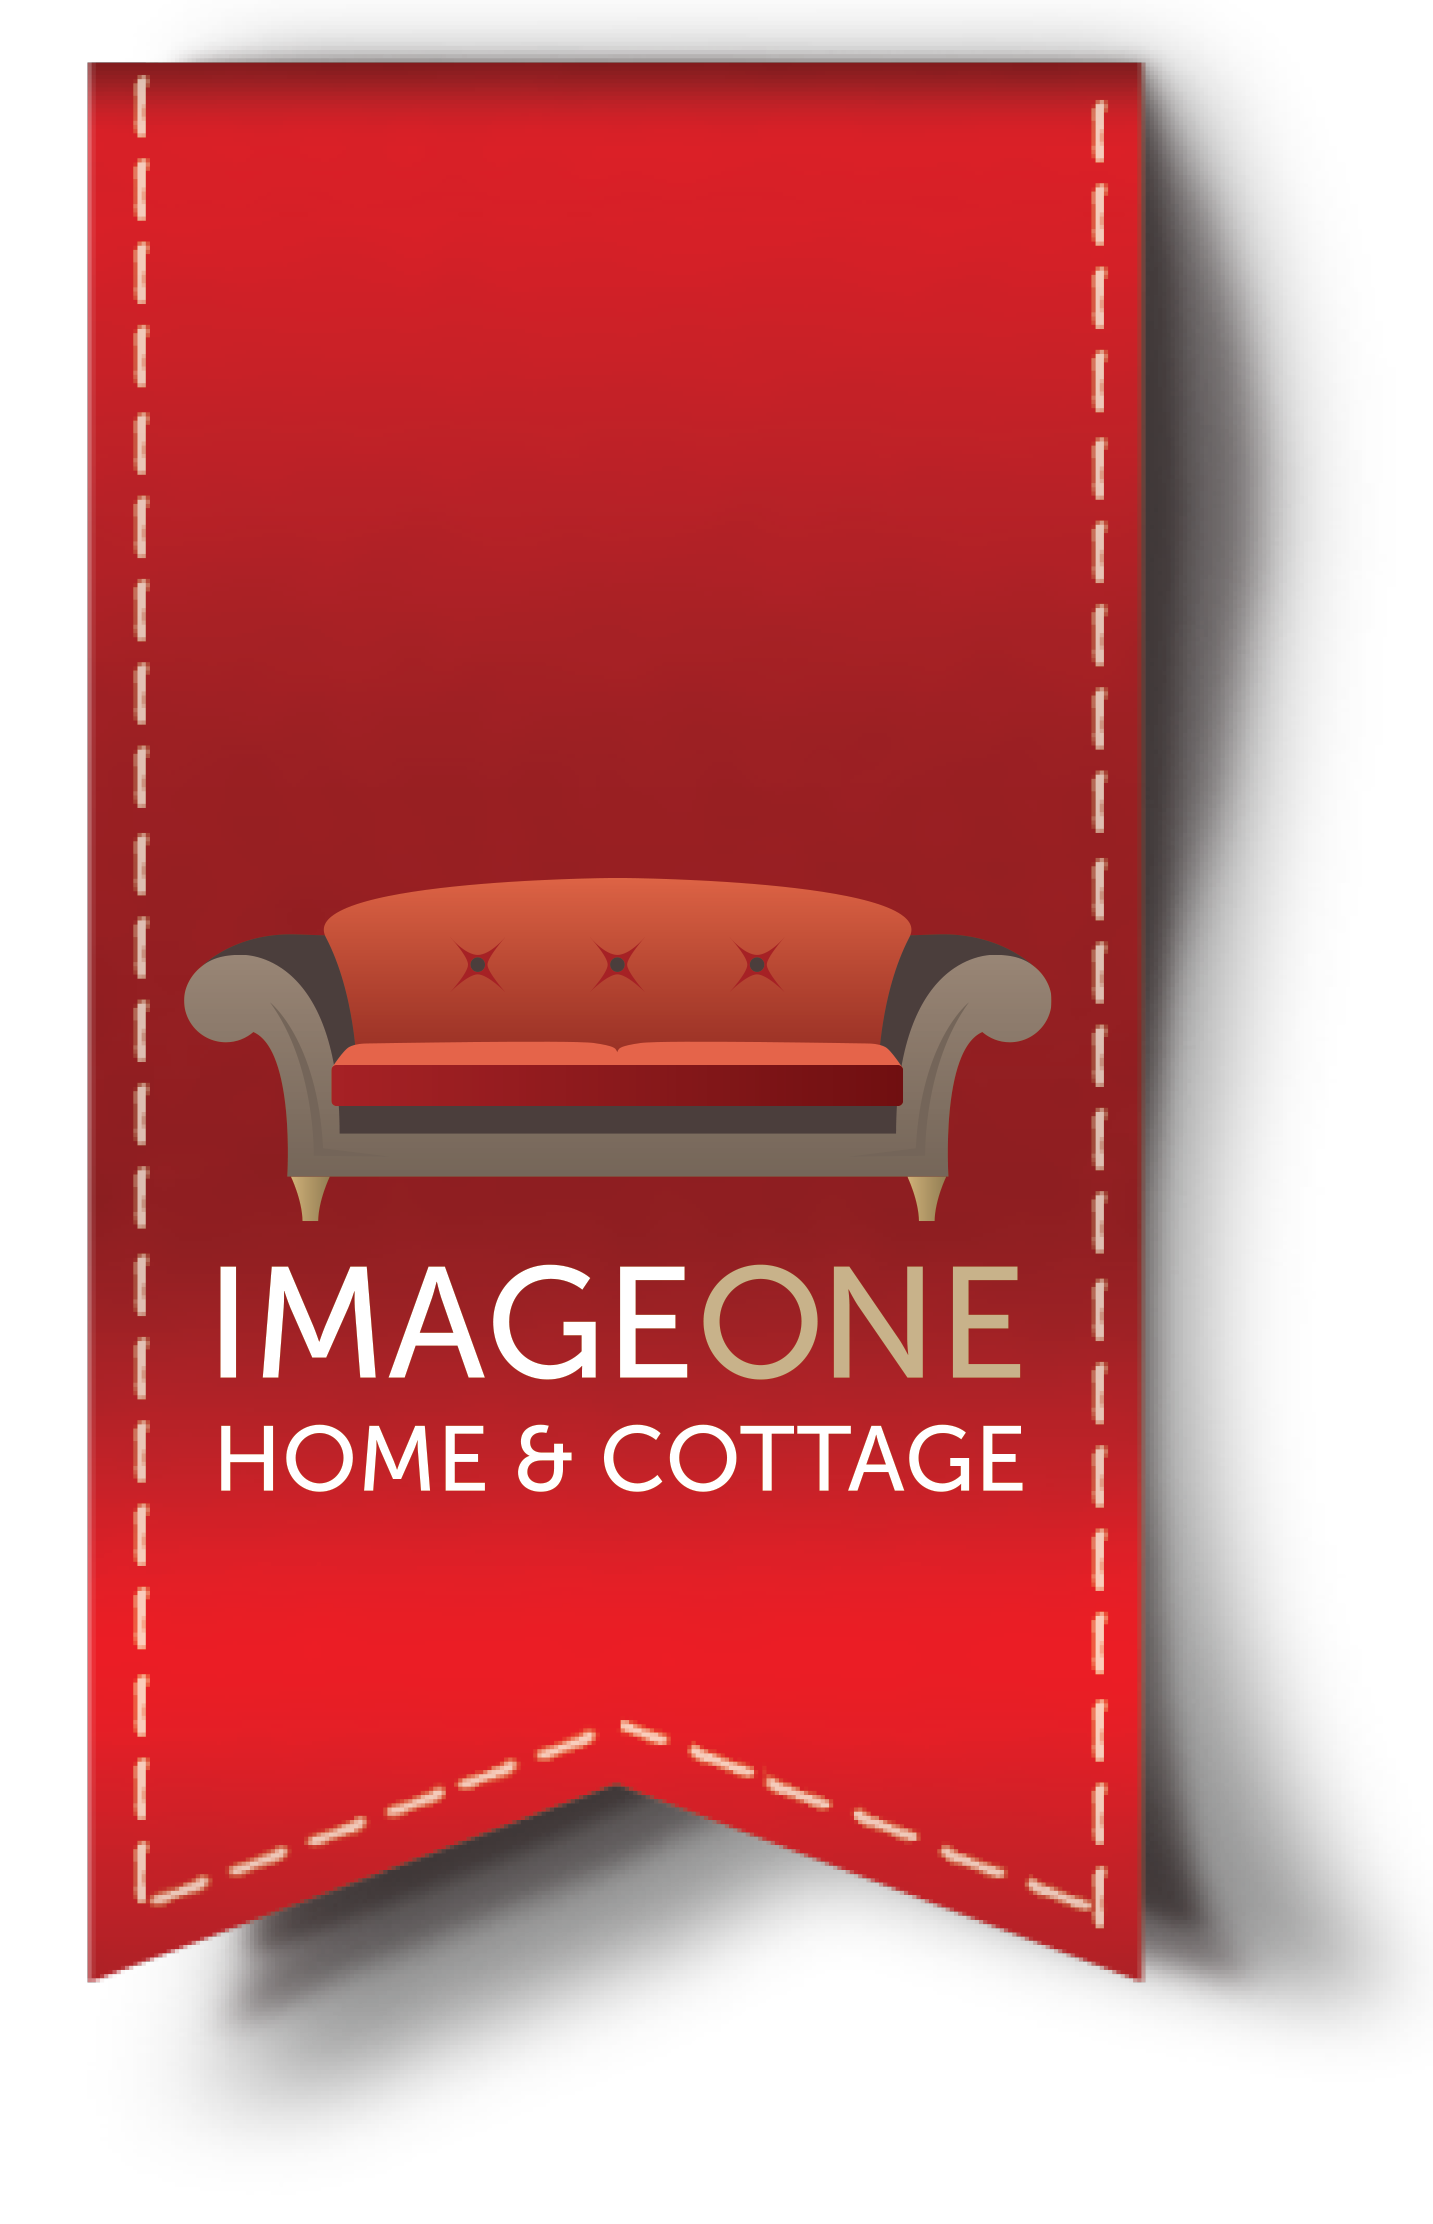 Image One Home &amp; Cottage